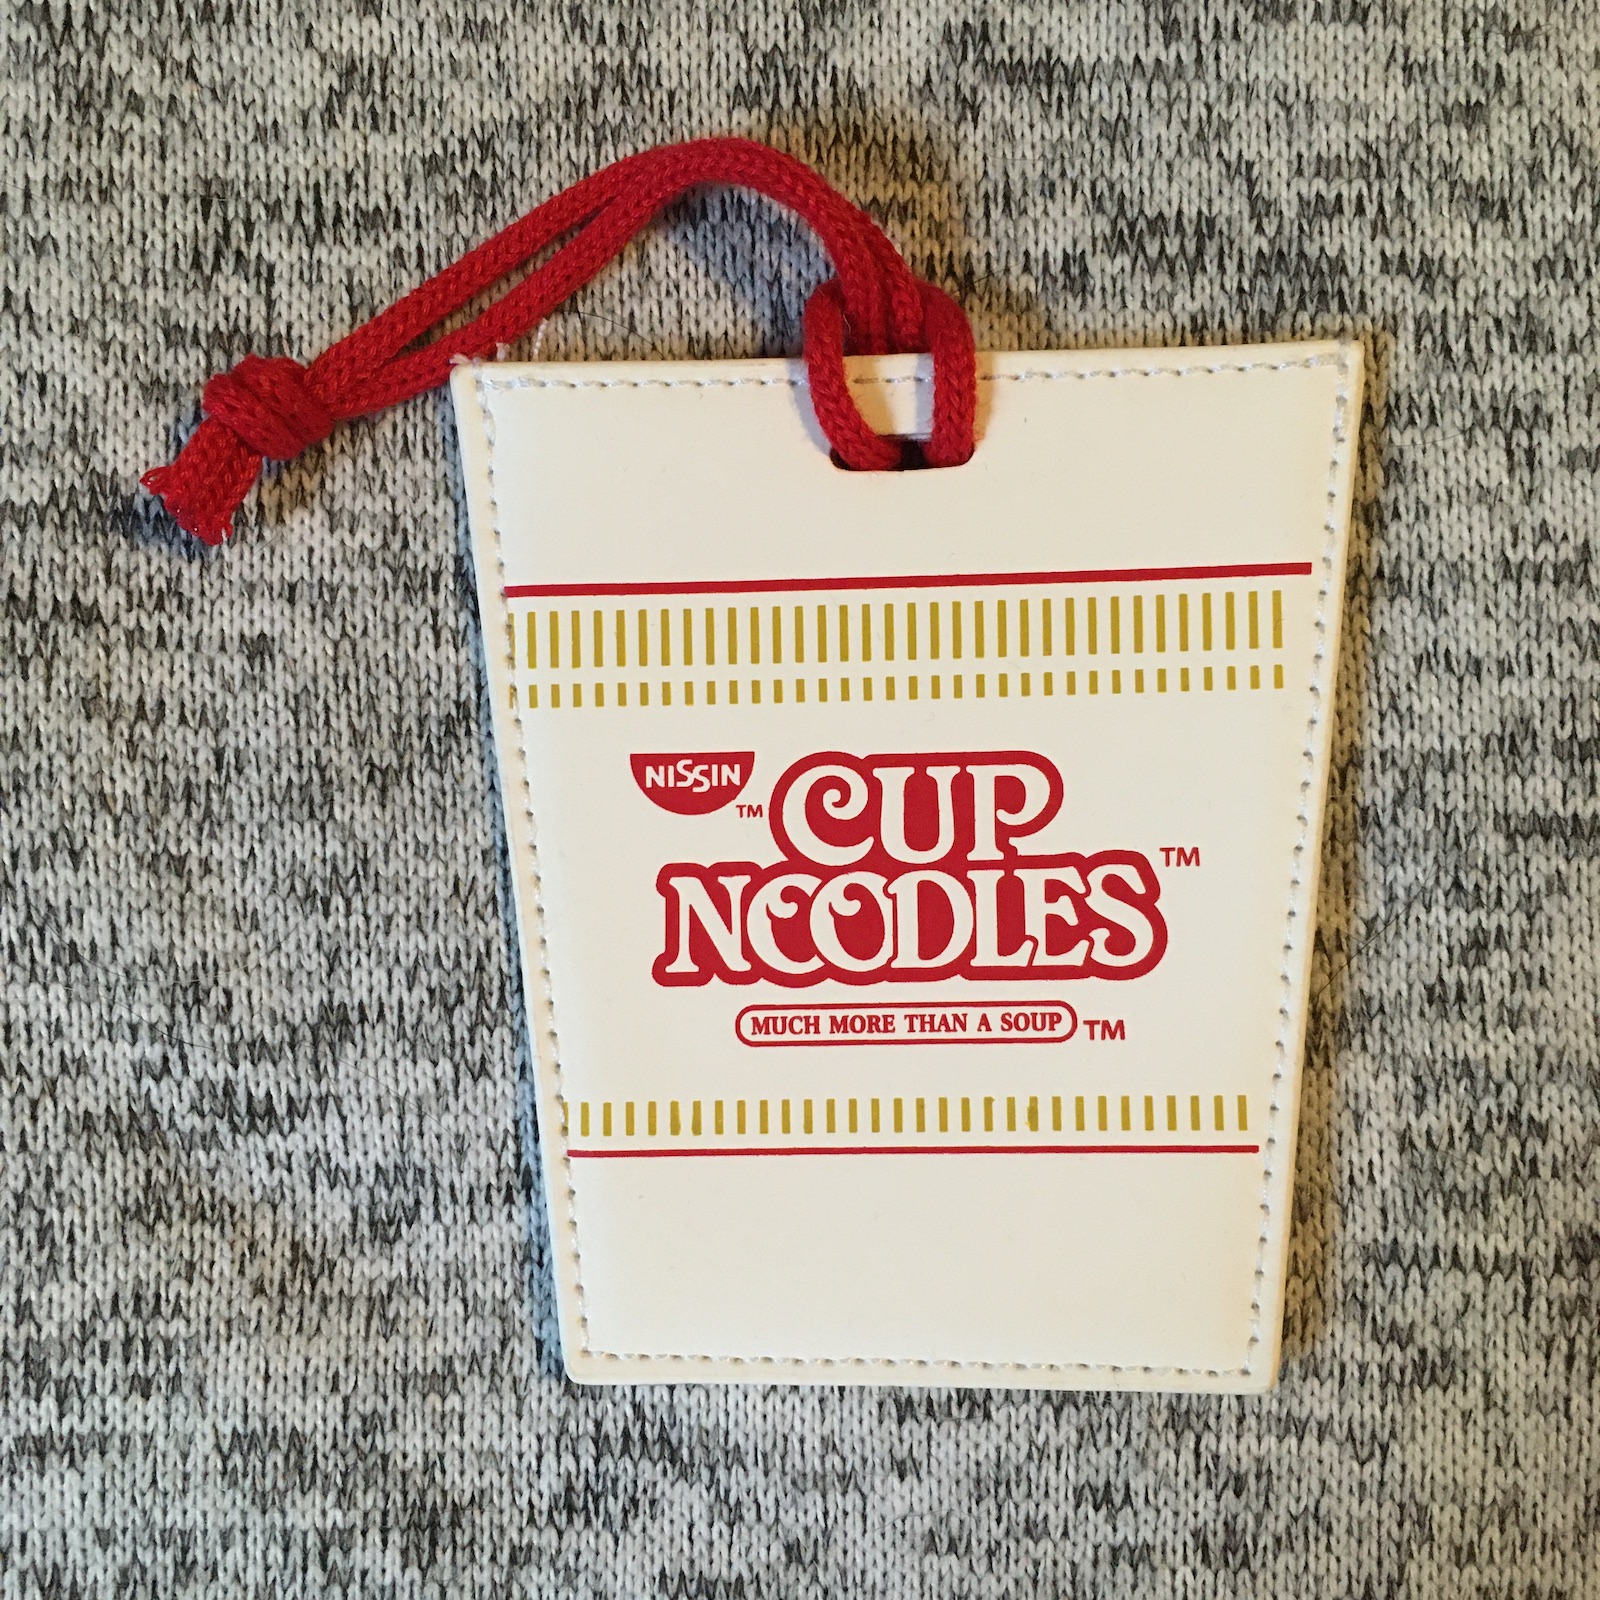 Cup Noodle luggage tag.